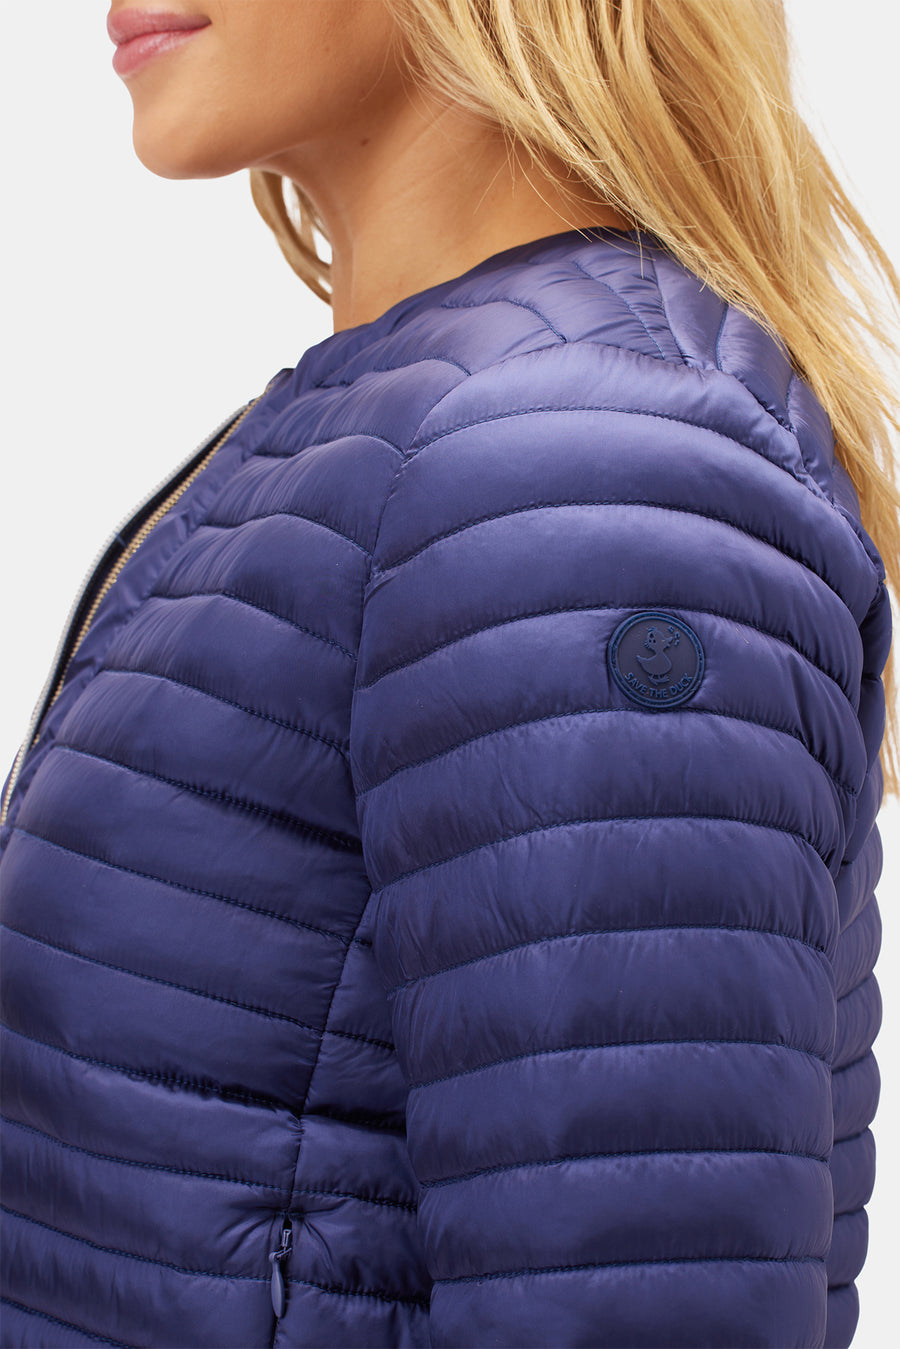 Save The Duck Carina Puffer Jacket - Navy Blue